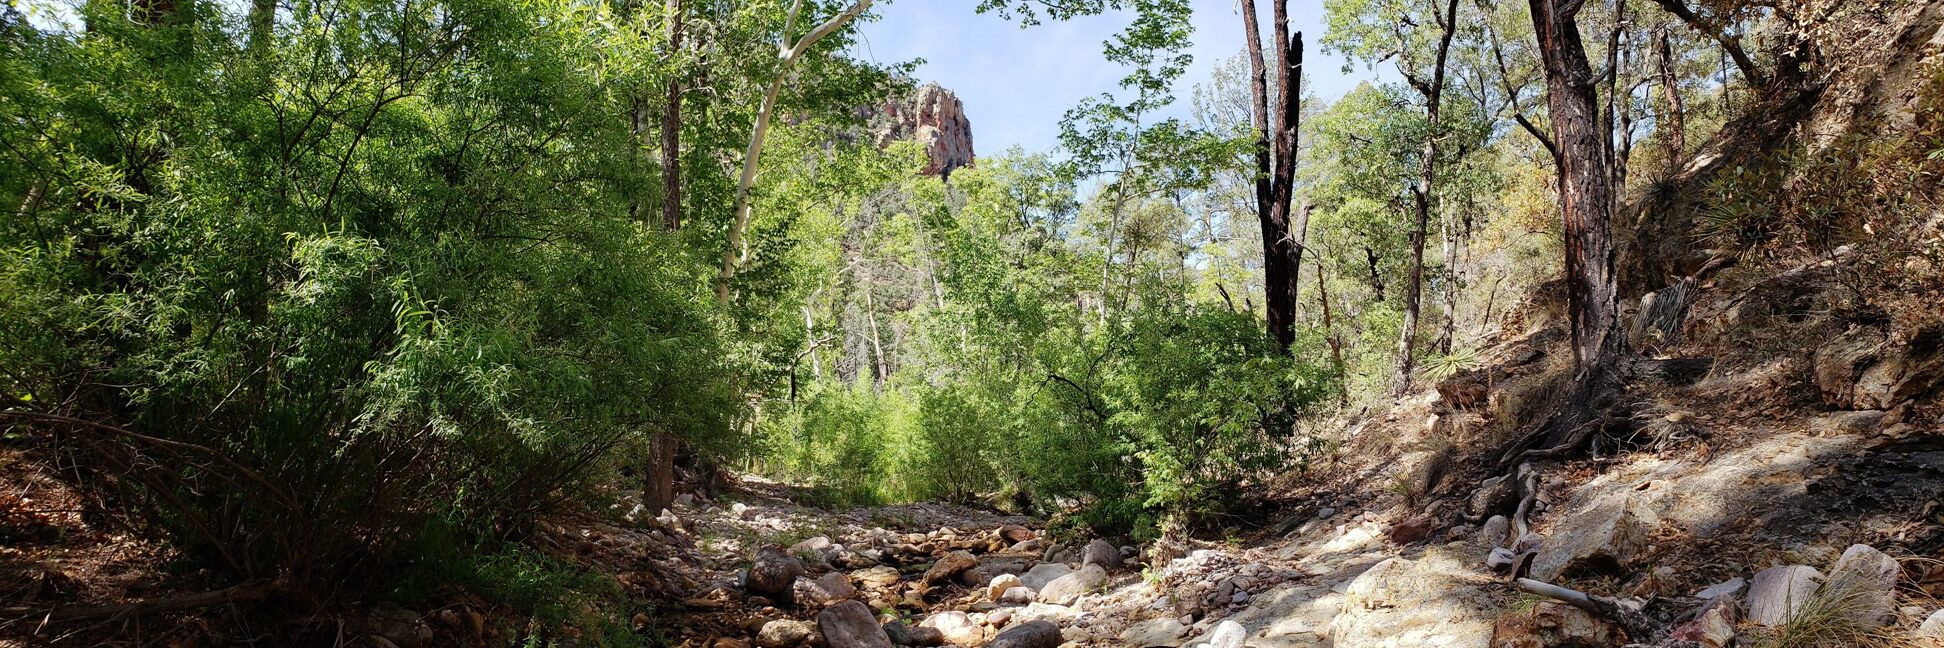 South Fork of Cave Creek by Jennie MacFarland